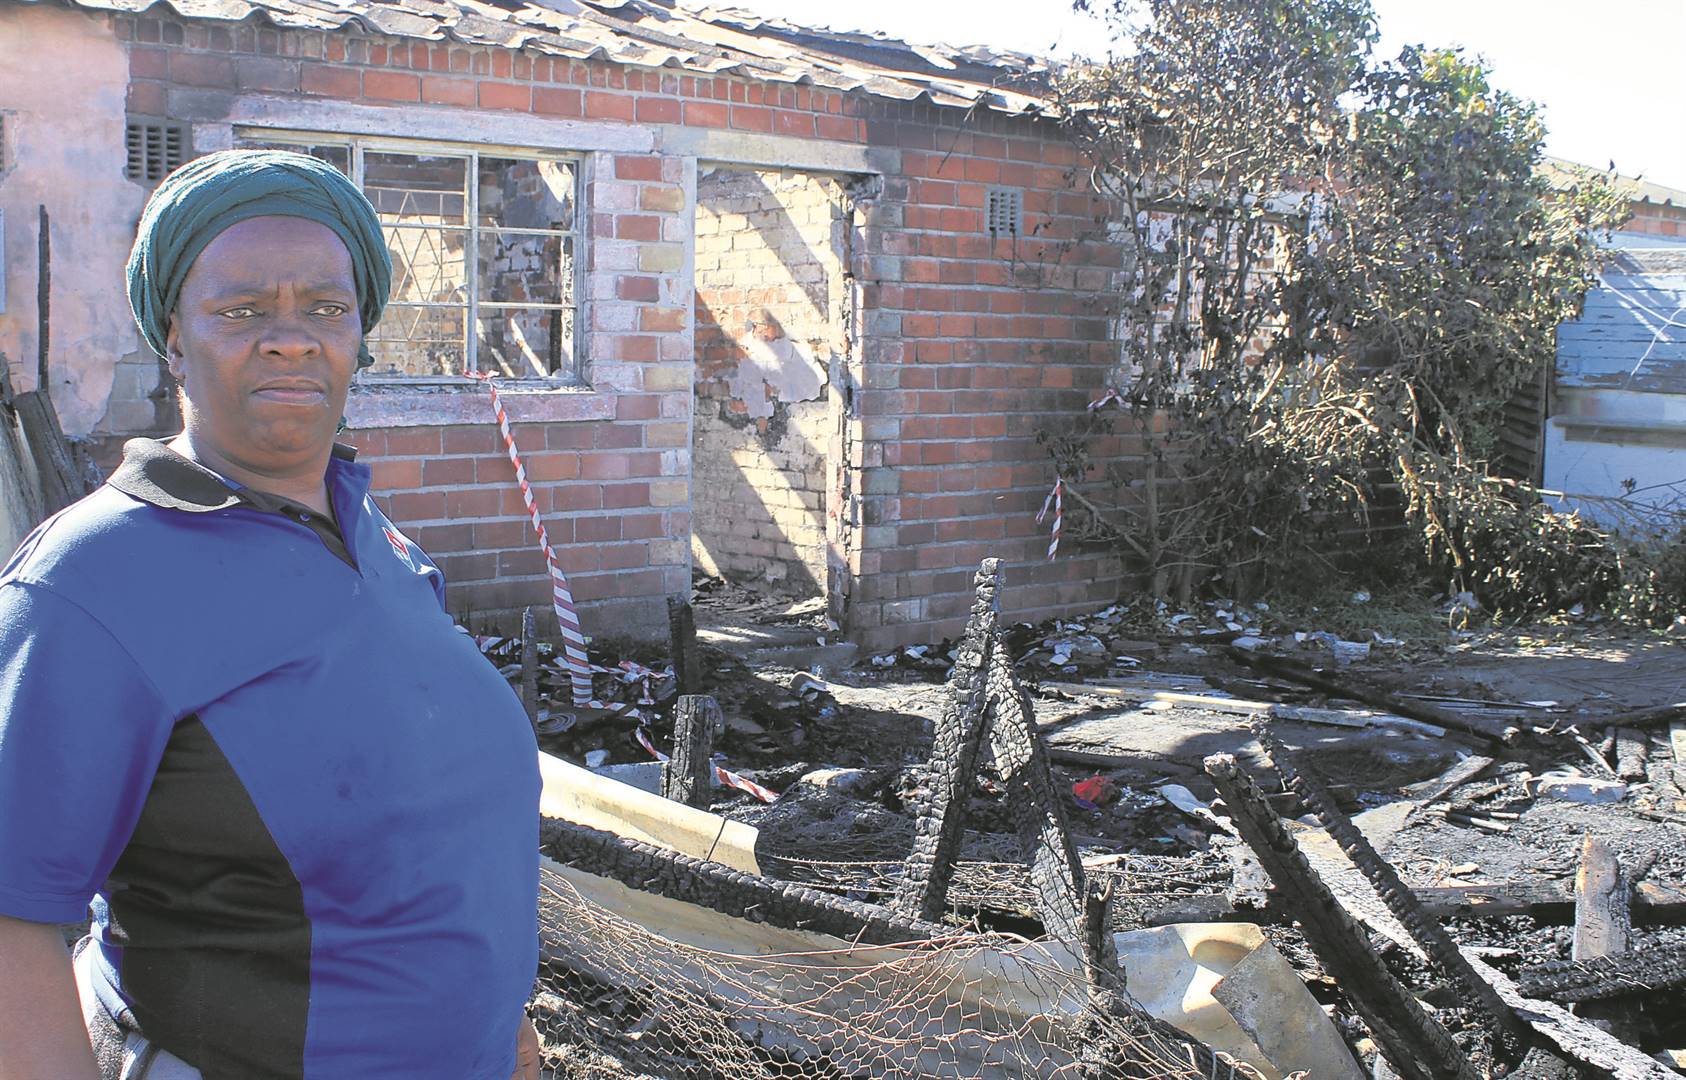 Xoliswa Qikana says they tried to save the siblings, but the flames were too strong.Photo by Lindile Mbontsi